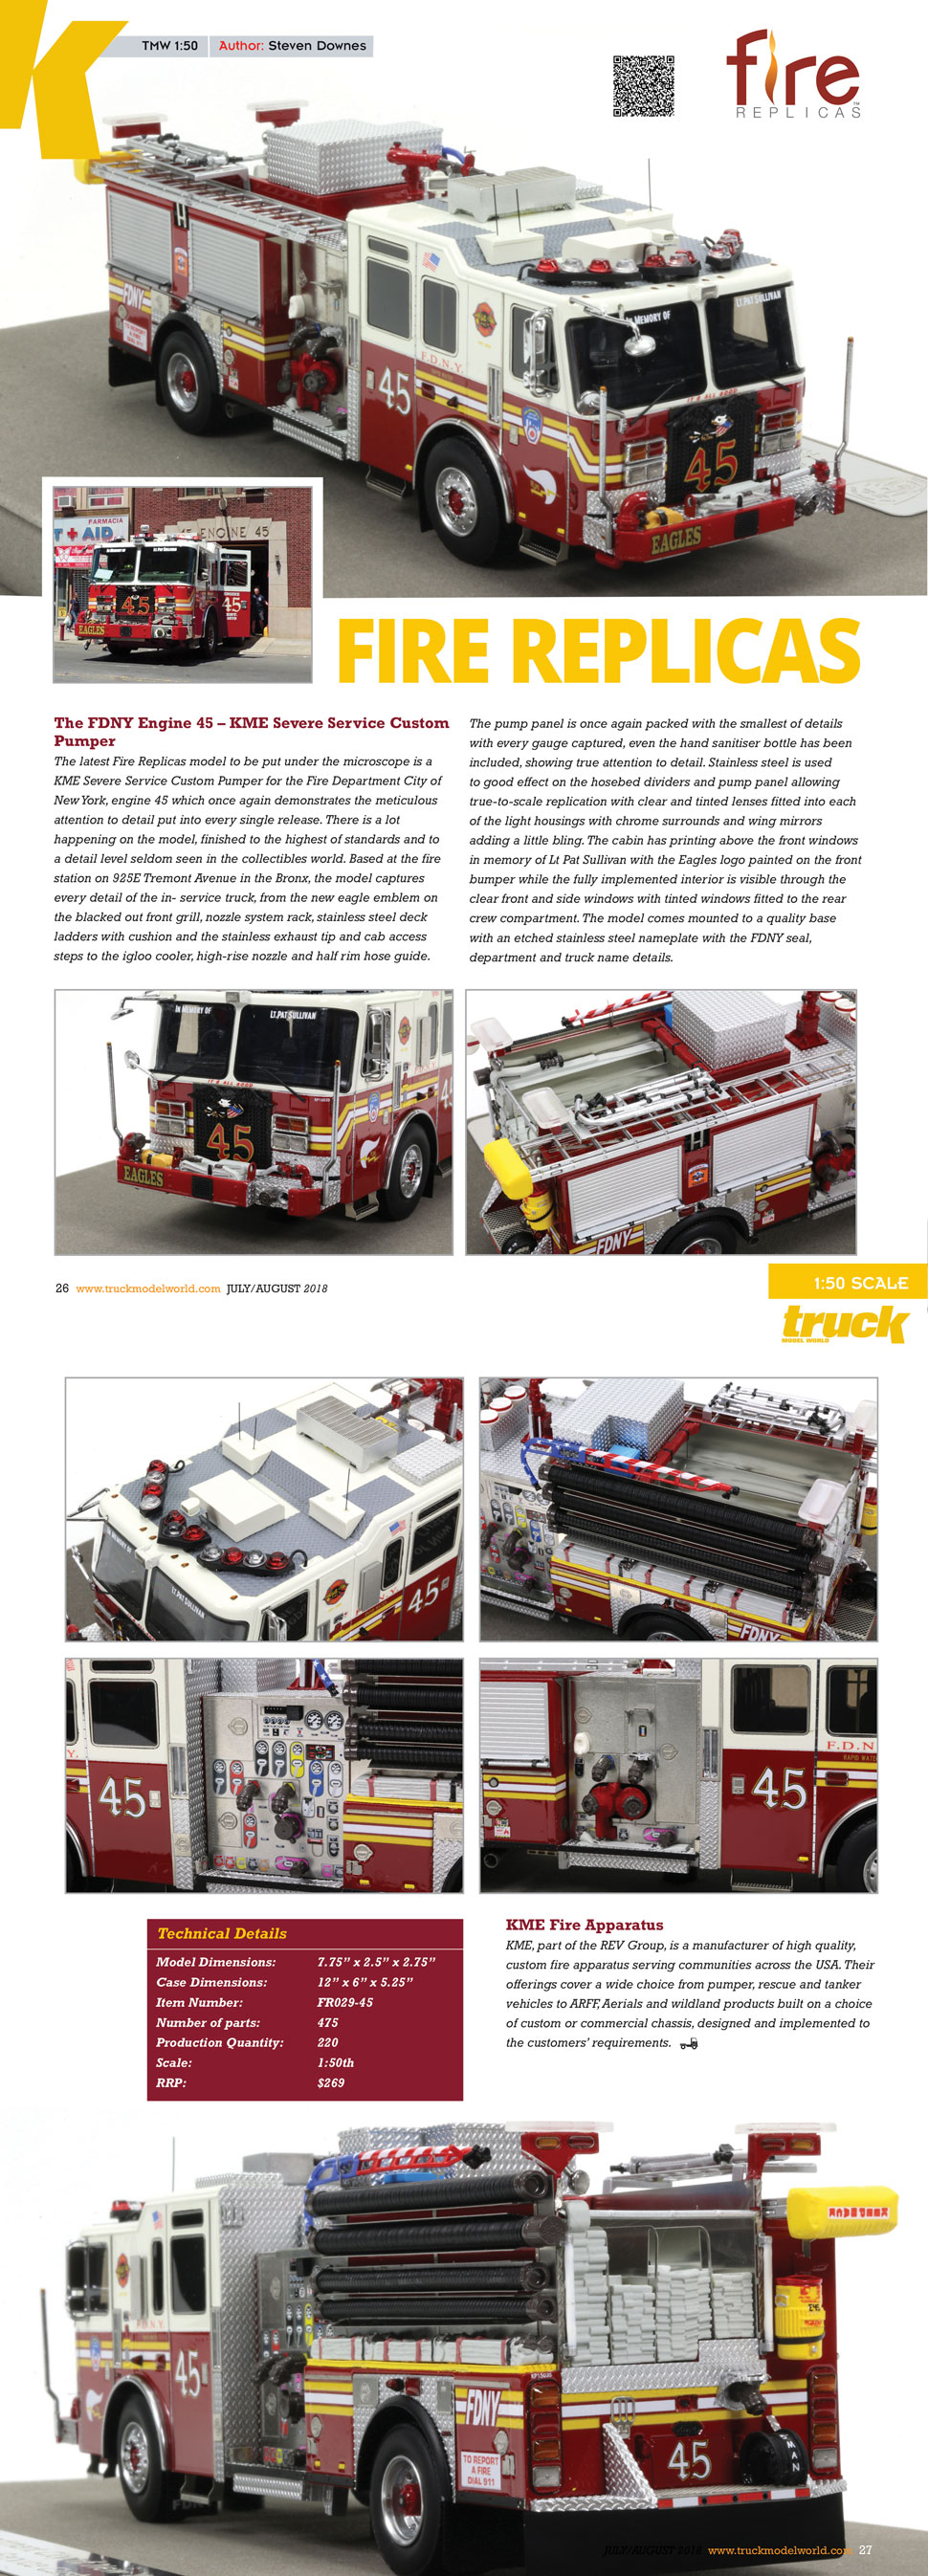 Learn more about FDNY Engine 45